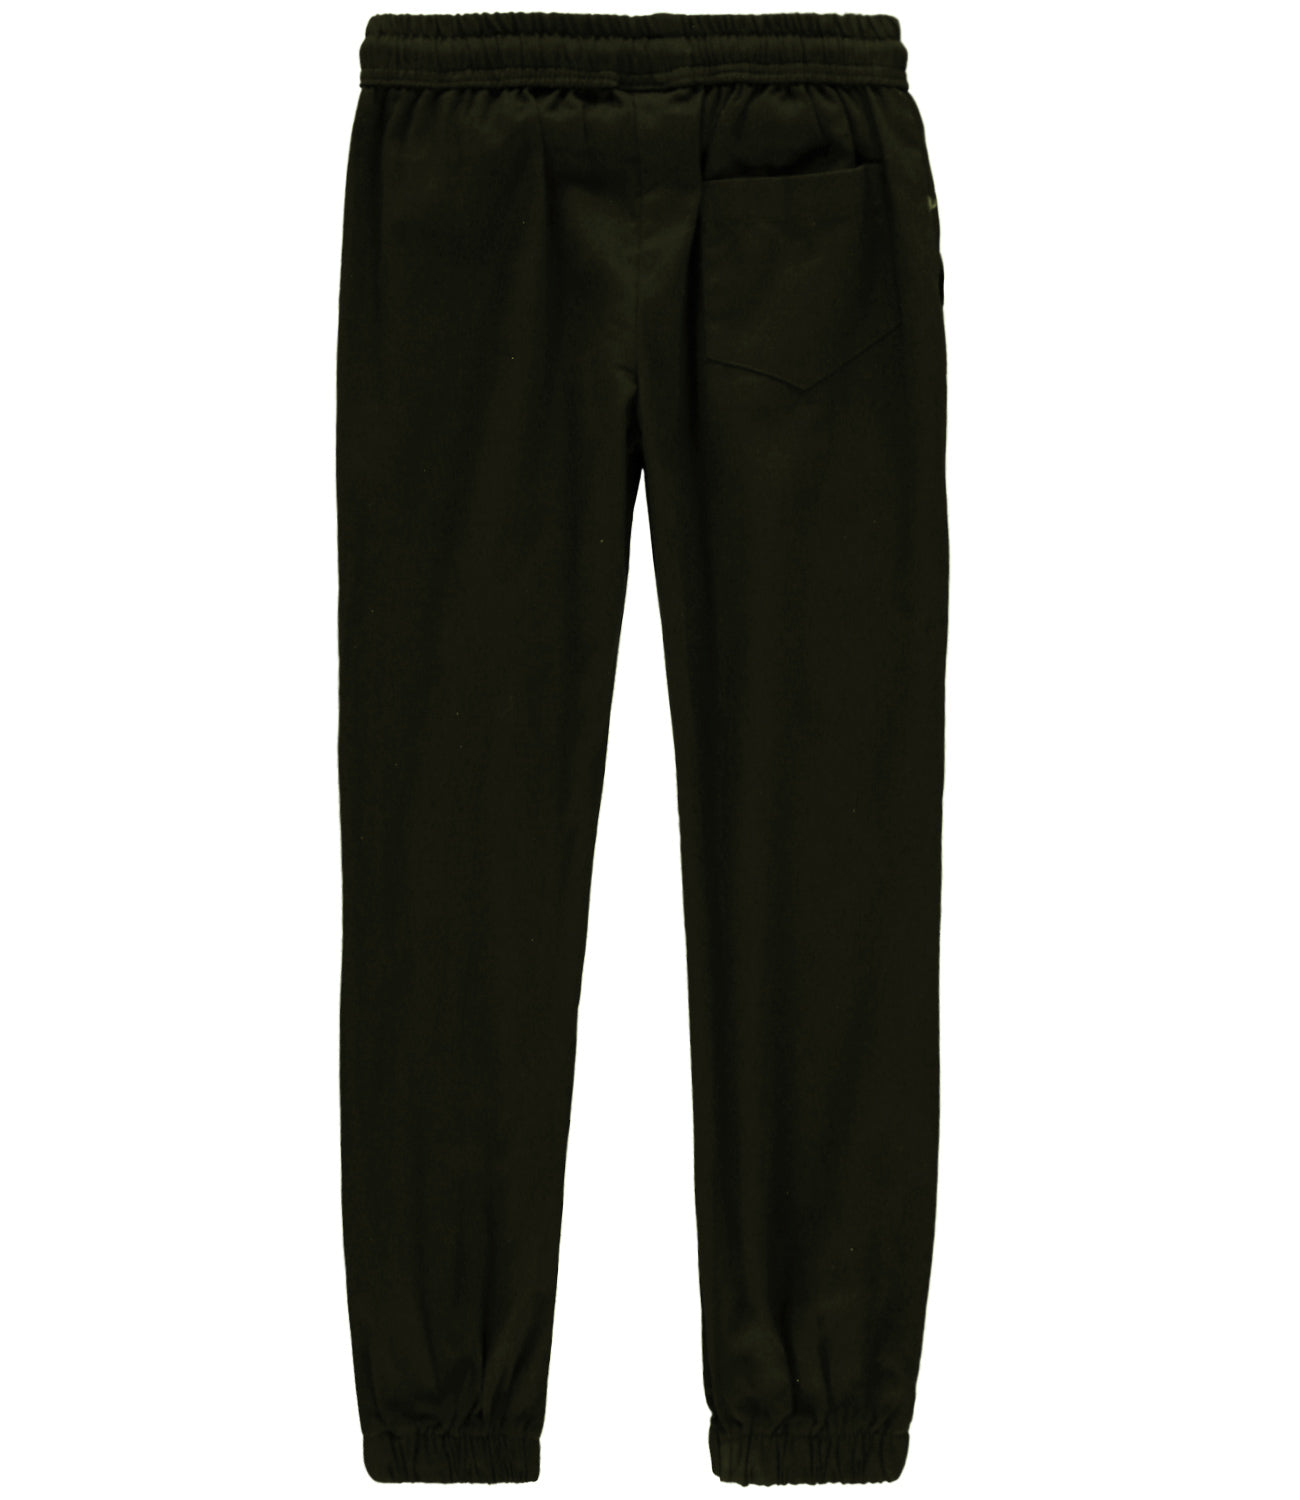 LR Scoop Boys 8-20 Twill Jogger with Elastic-Waistband and Drawstring